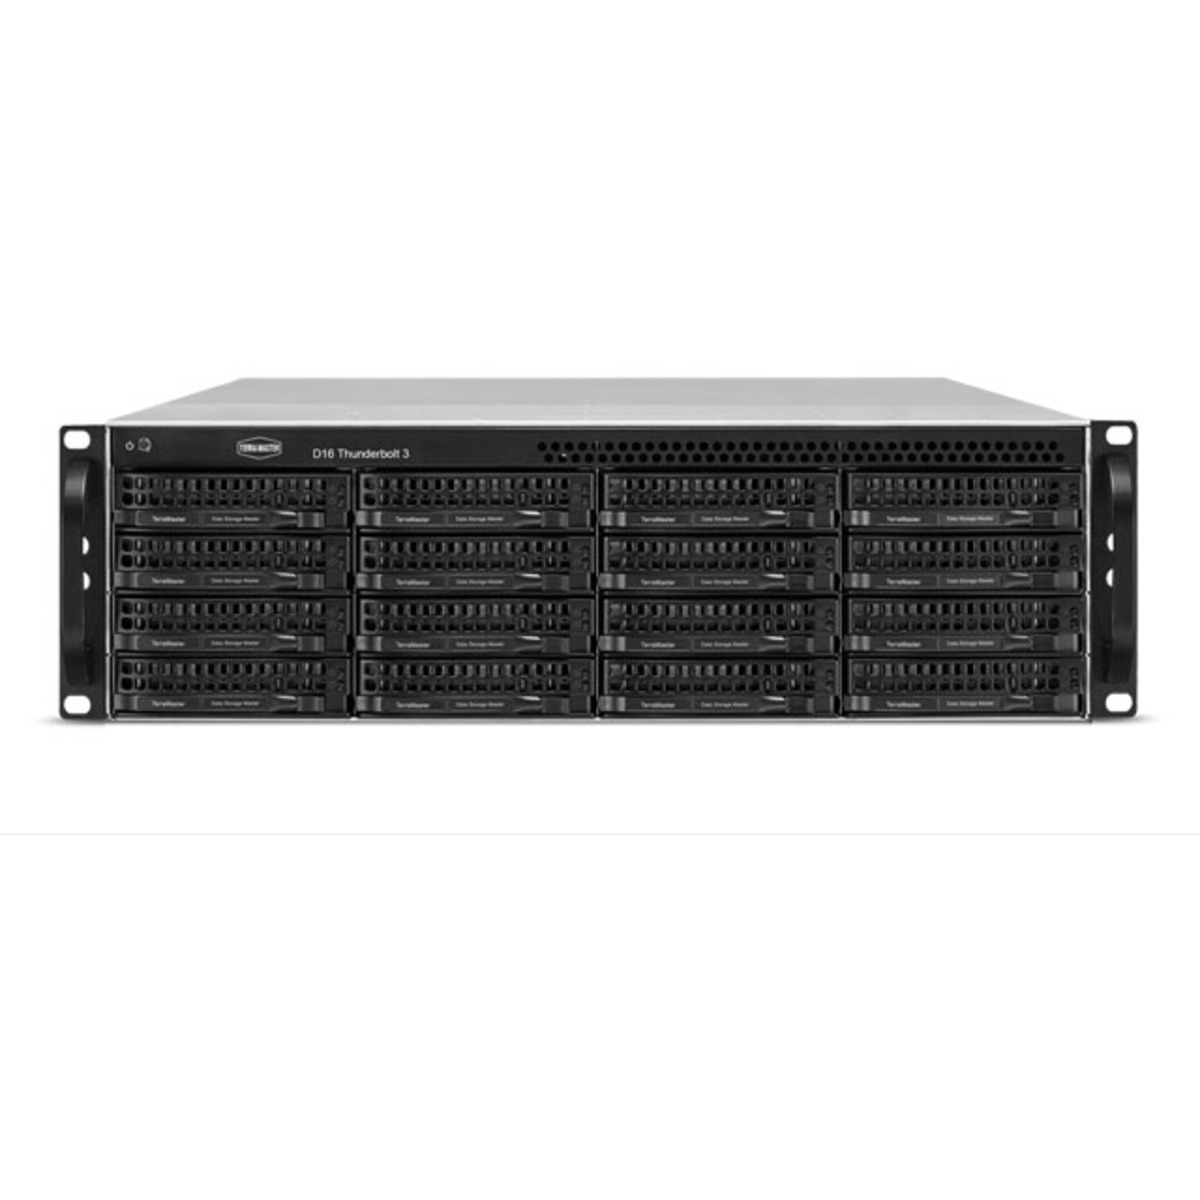 TerraMaster D16 Thunderbolt 3 60tb 16-Bay RackMount Multimedia / Power User / Business DAS - Direct Attached Storage Device 15x4tb Samsung 870 QVO MZ-77Q4T0 2.5 560/530MB/s SATA 6Gb/s SSD CONSUMER Class Drives Installed - Burn-In Tested D16 Thunderbolt 3